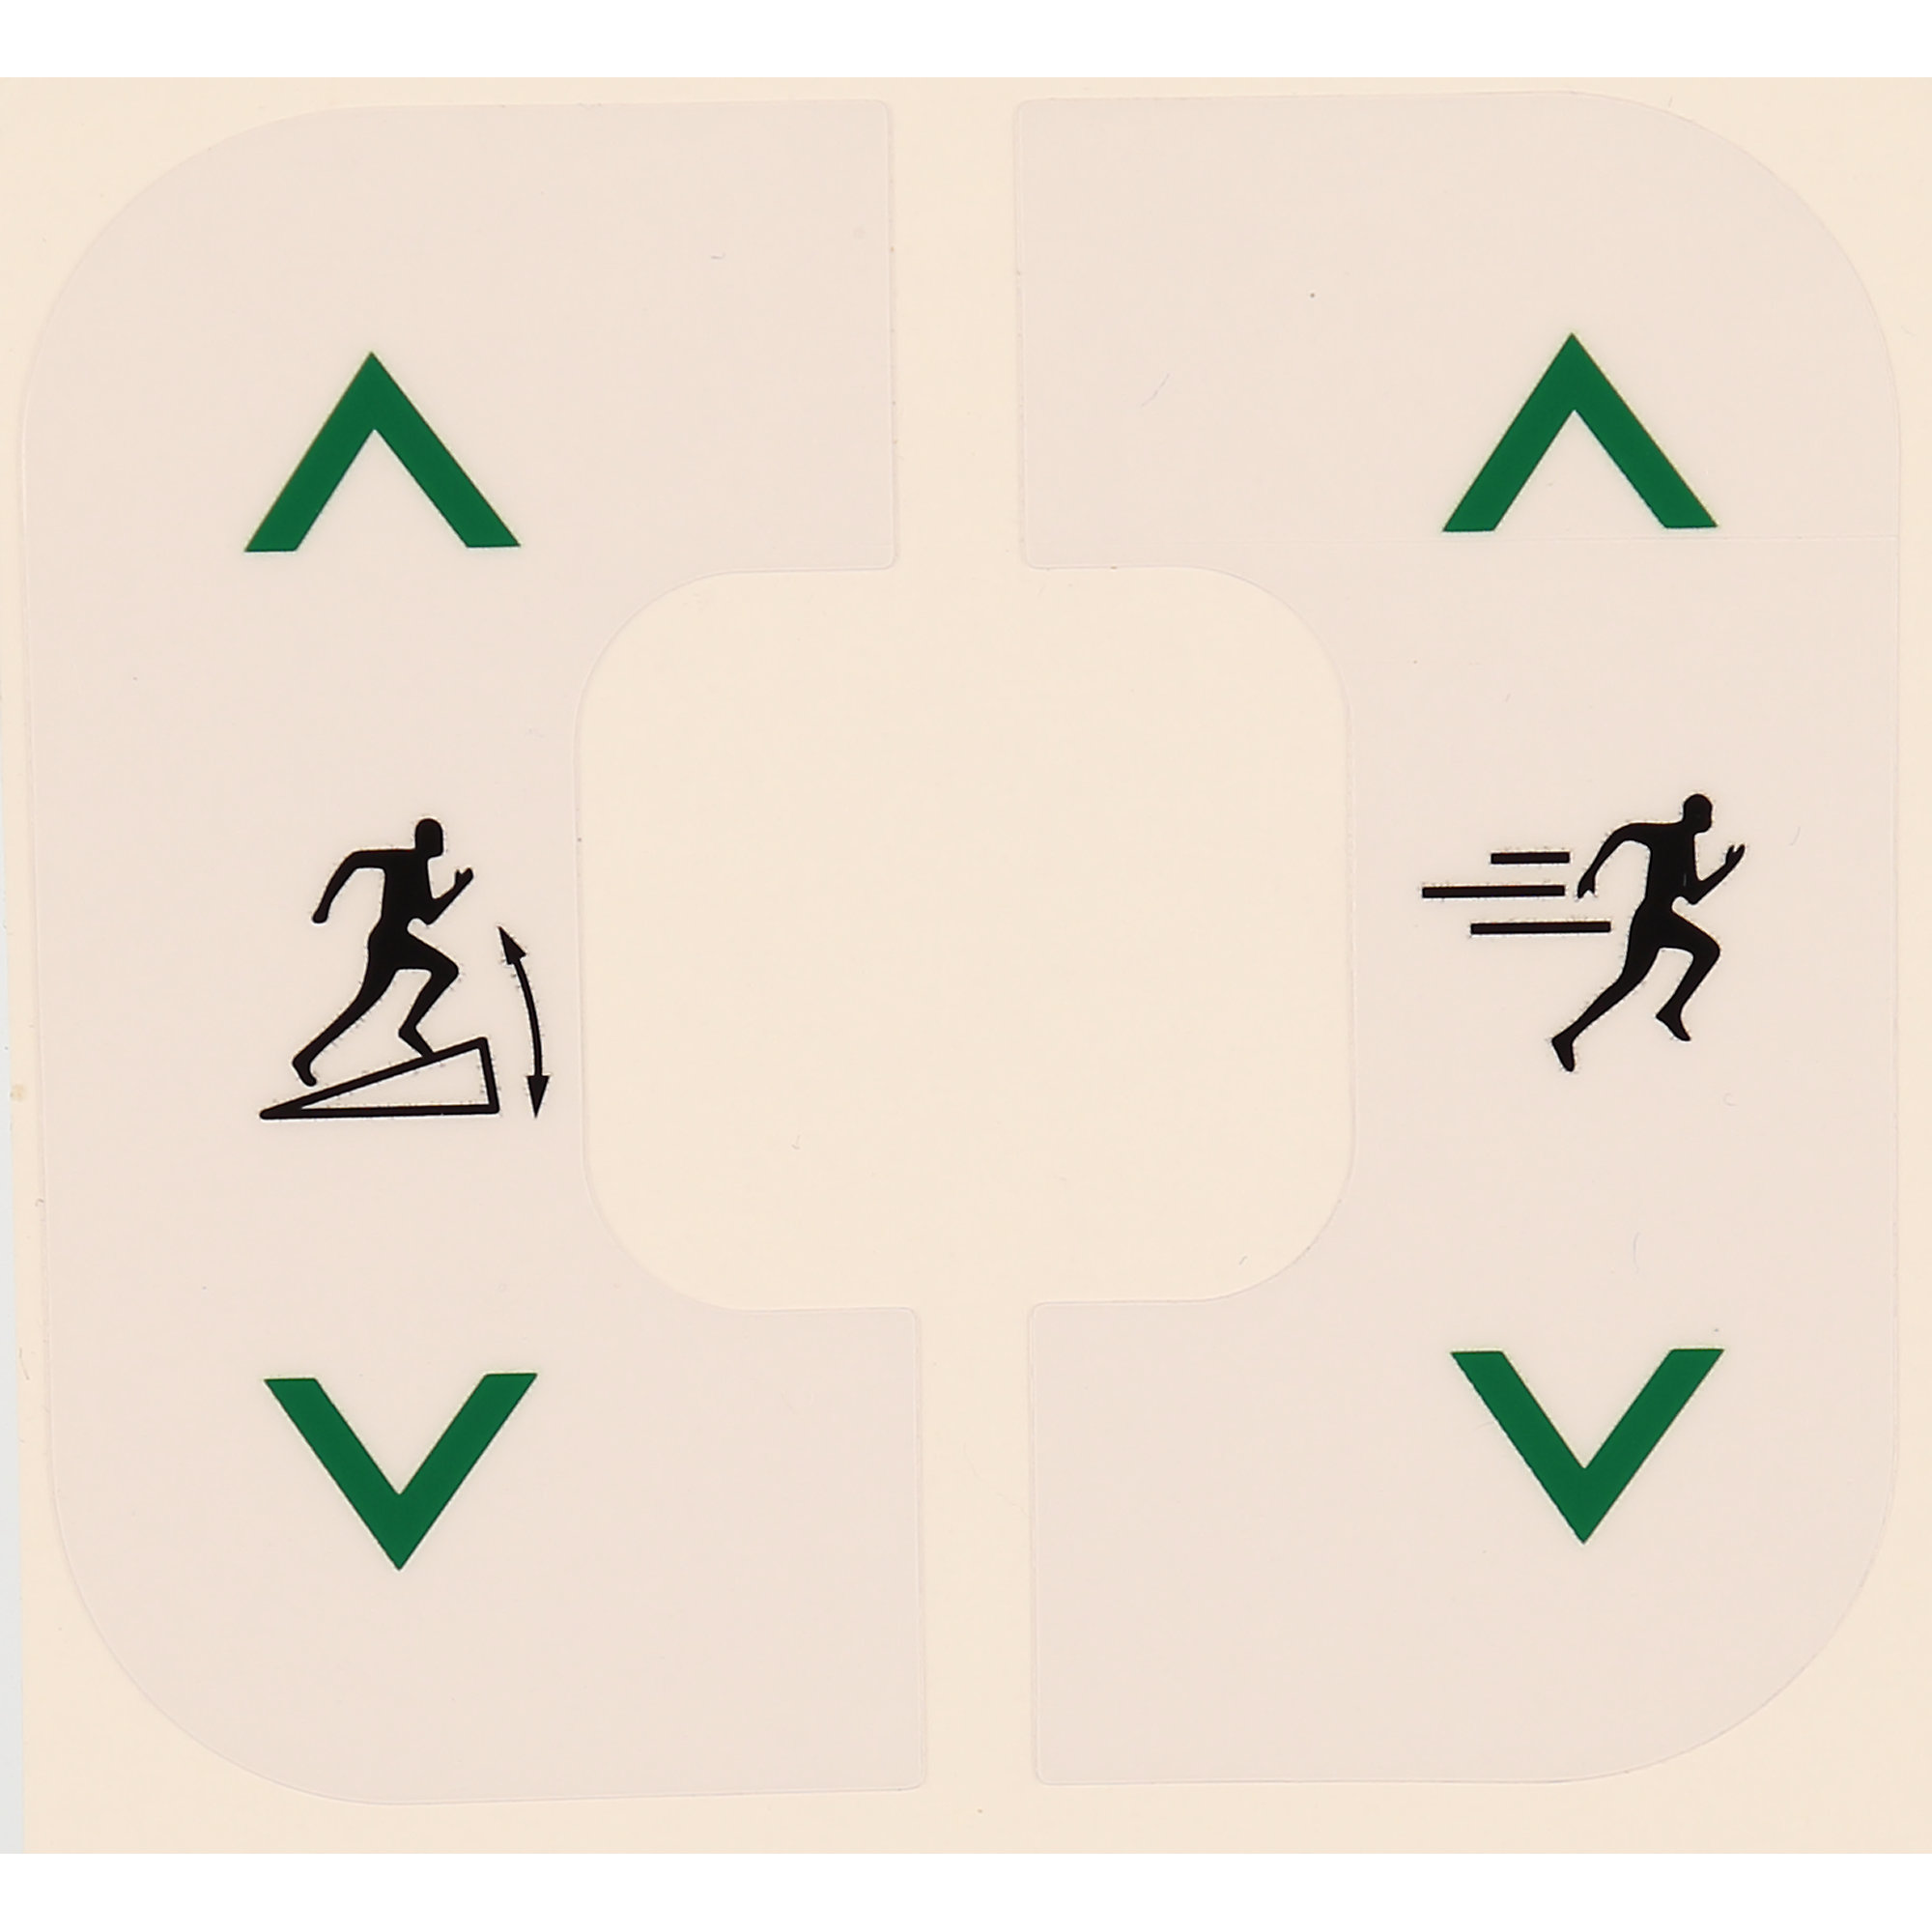 Incline and Speed Decal Set for D-Pad of certain Precor Treadmills